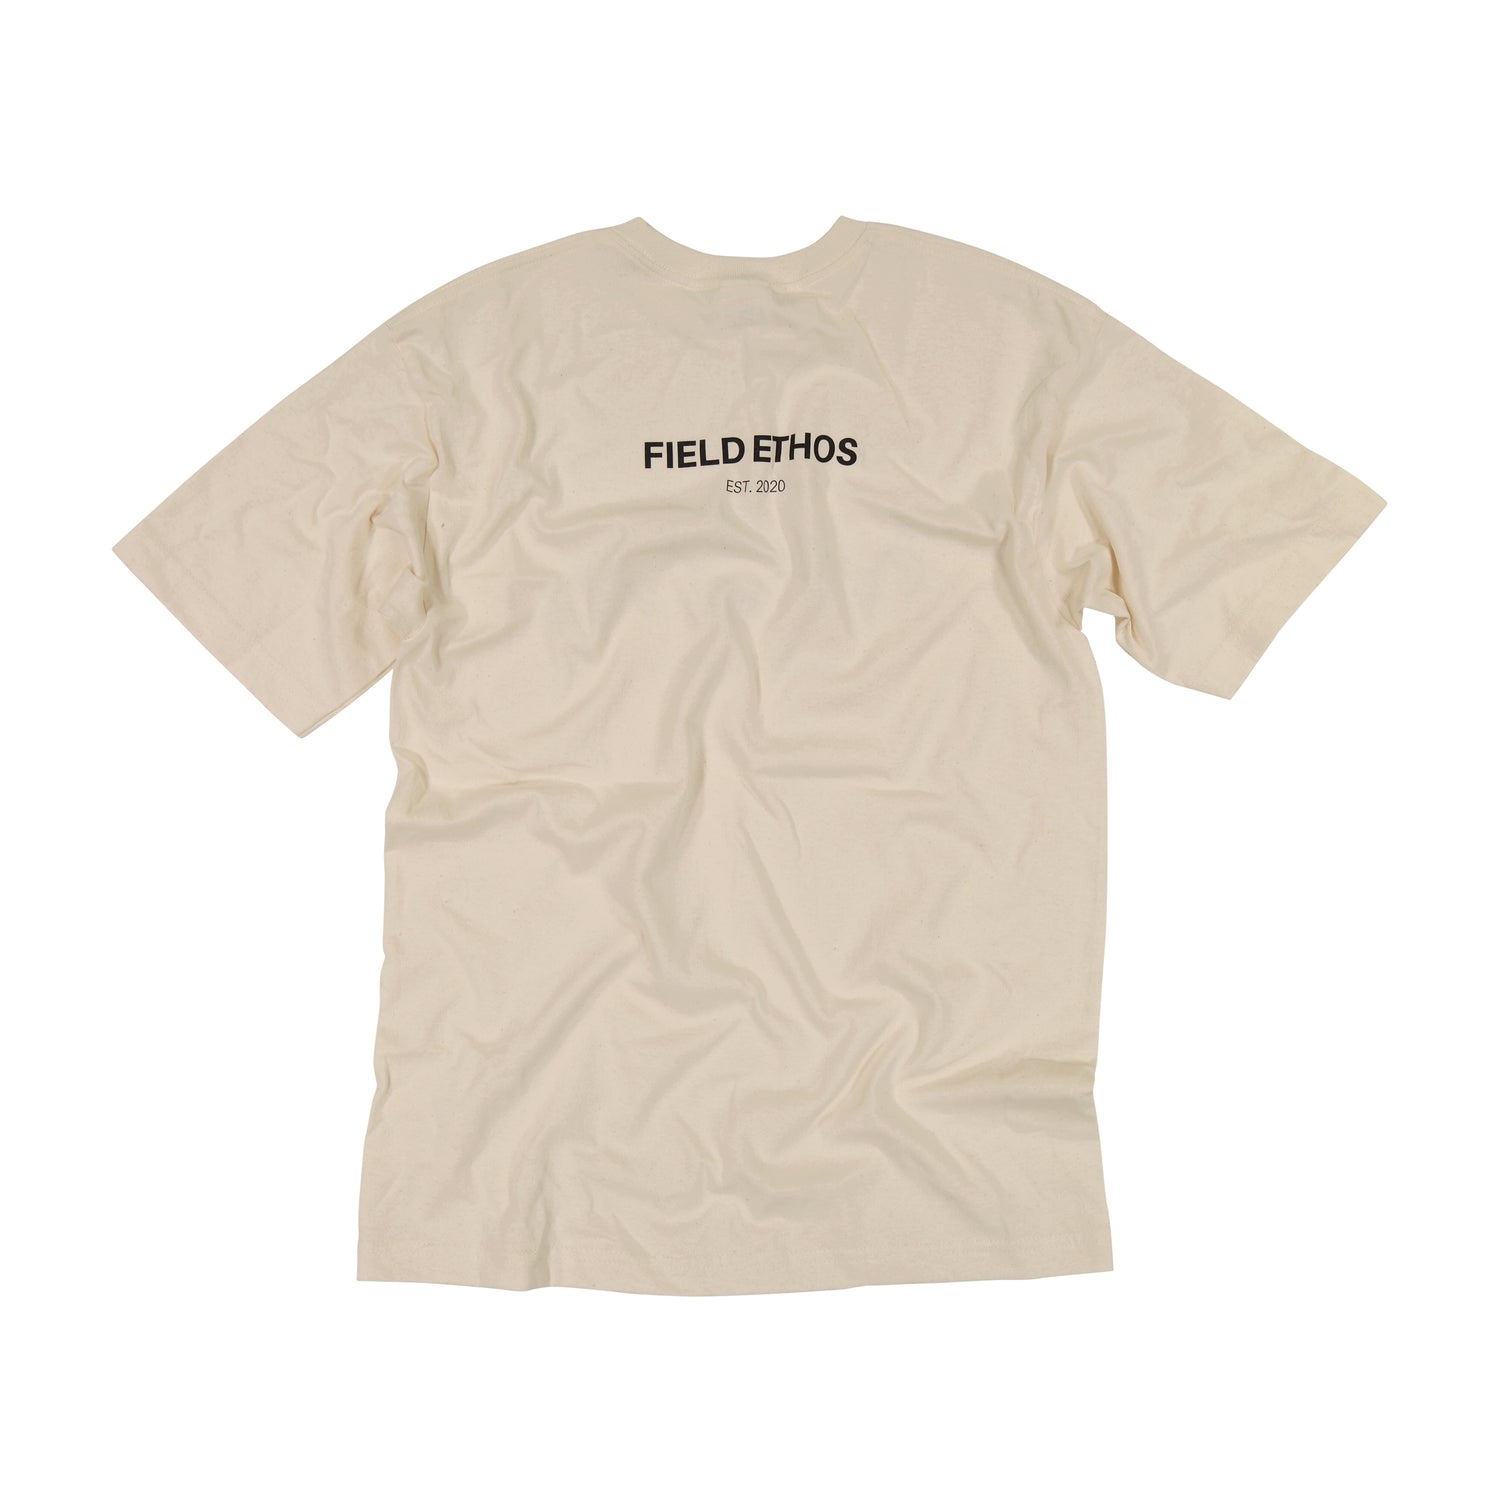 Field Ethos Diversity and Inclusion t-shirt – Field Ethos Journal